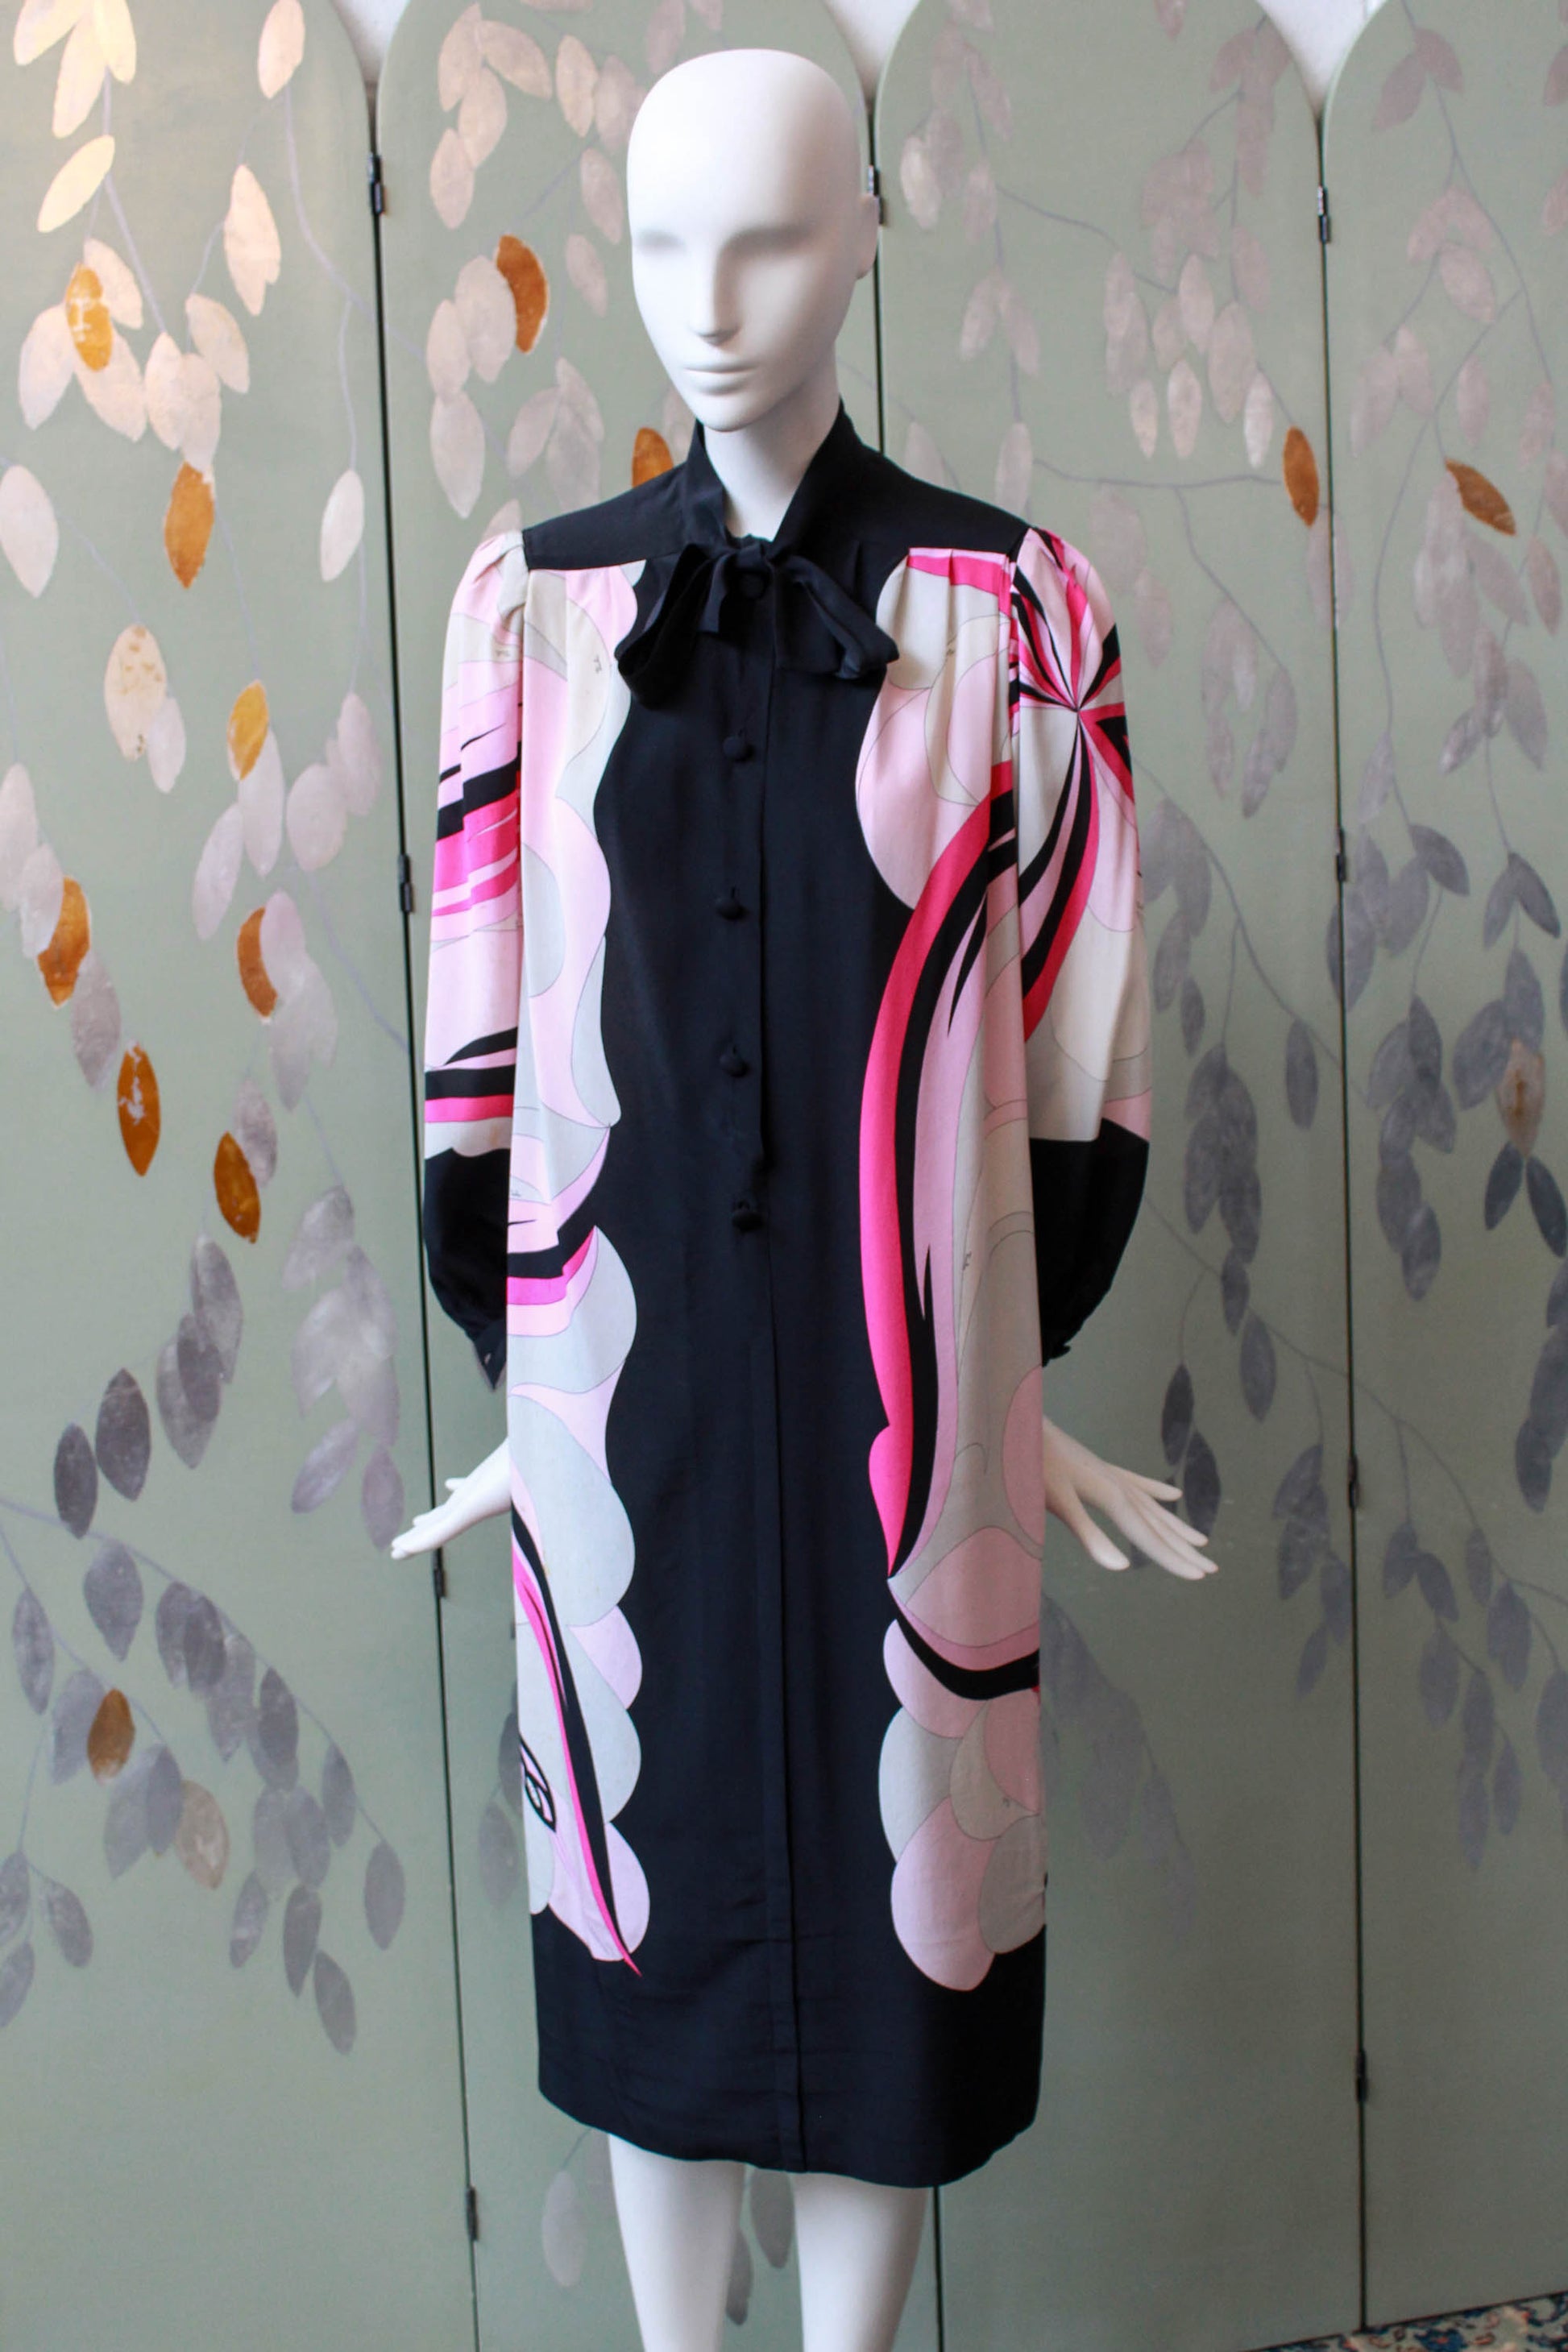 1960s emilio pucci pink and black printed dress with long sleeves, below the knee, puff sleeves and tie at neck. button front design